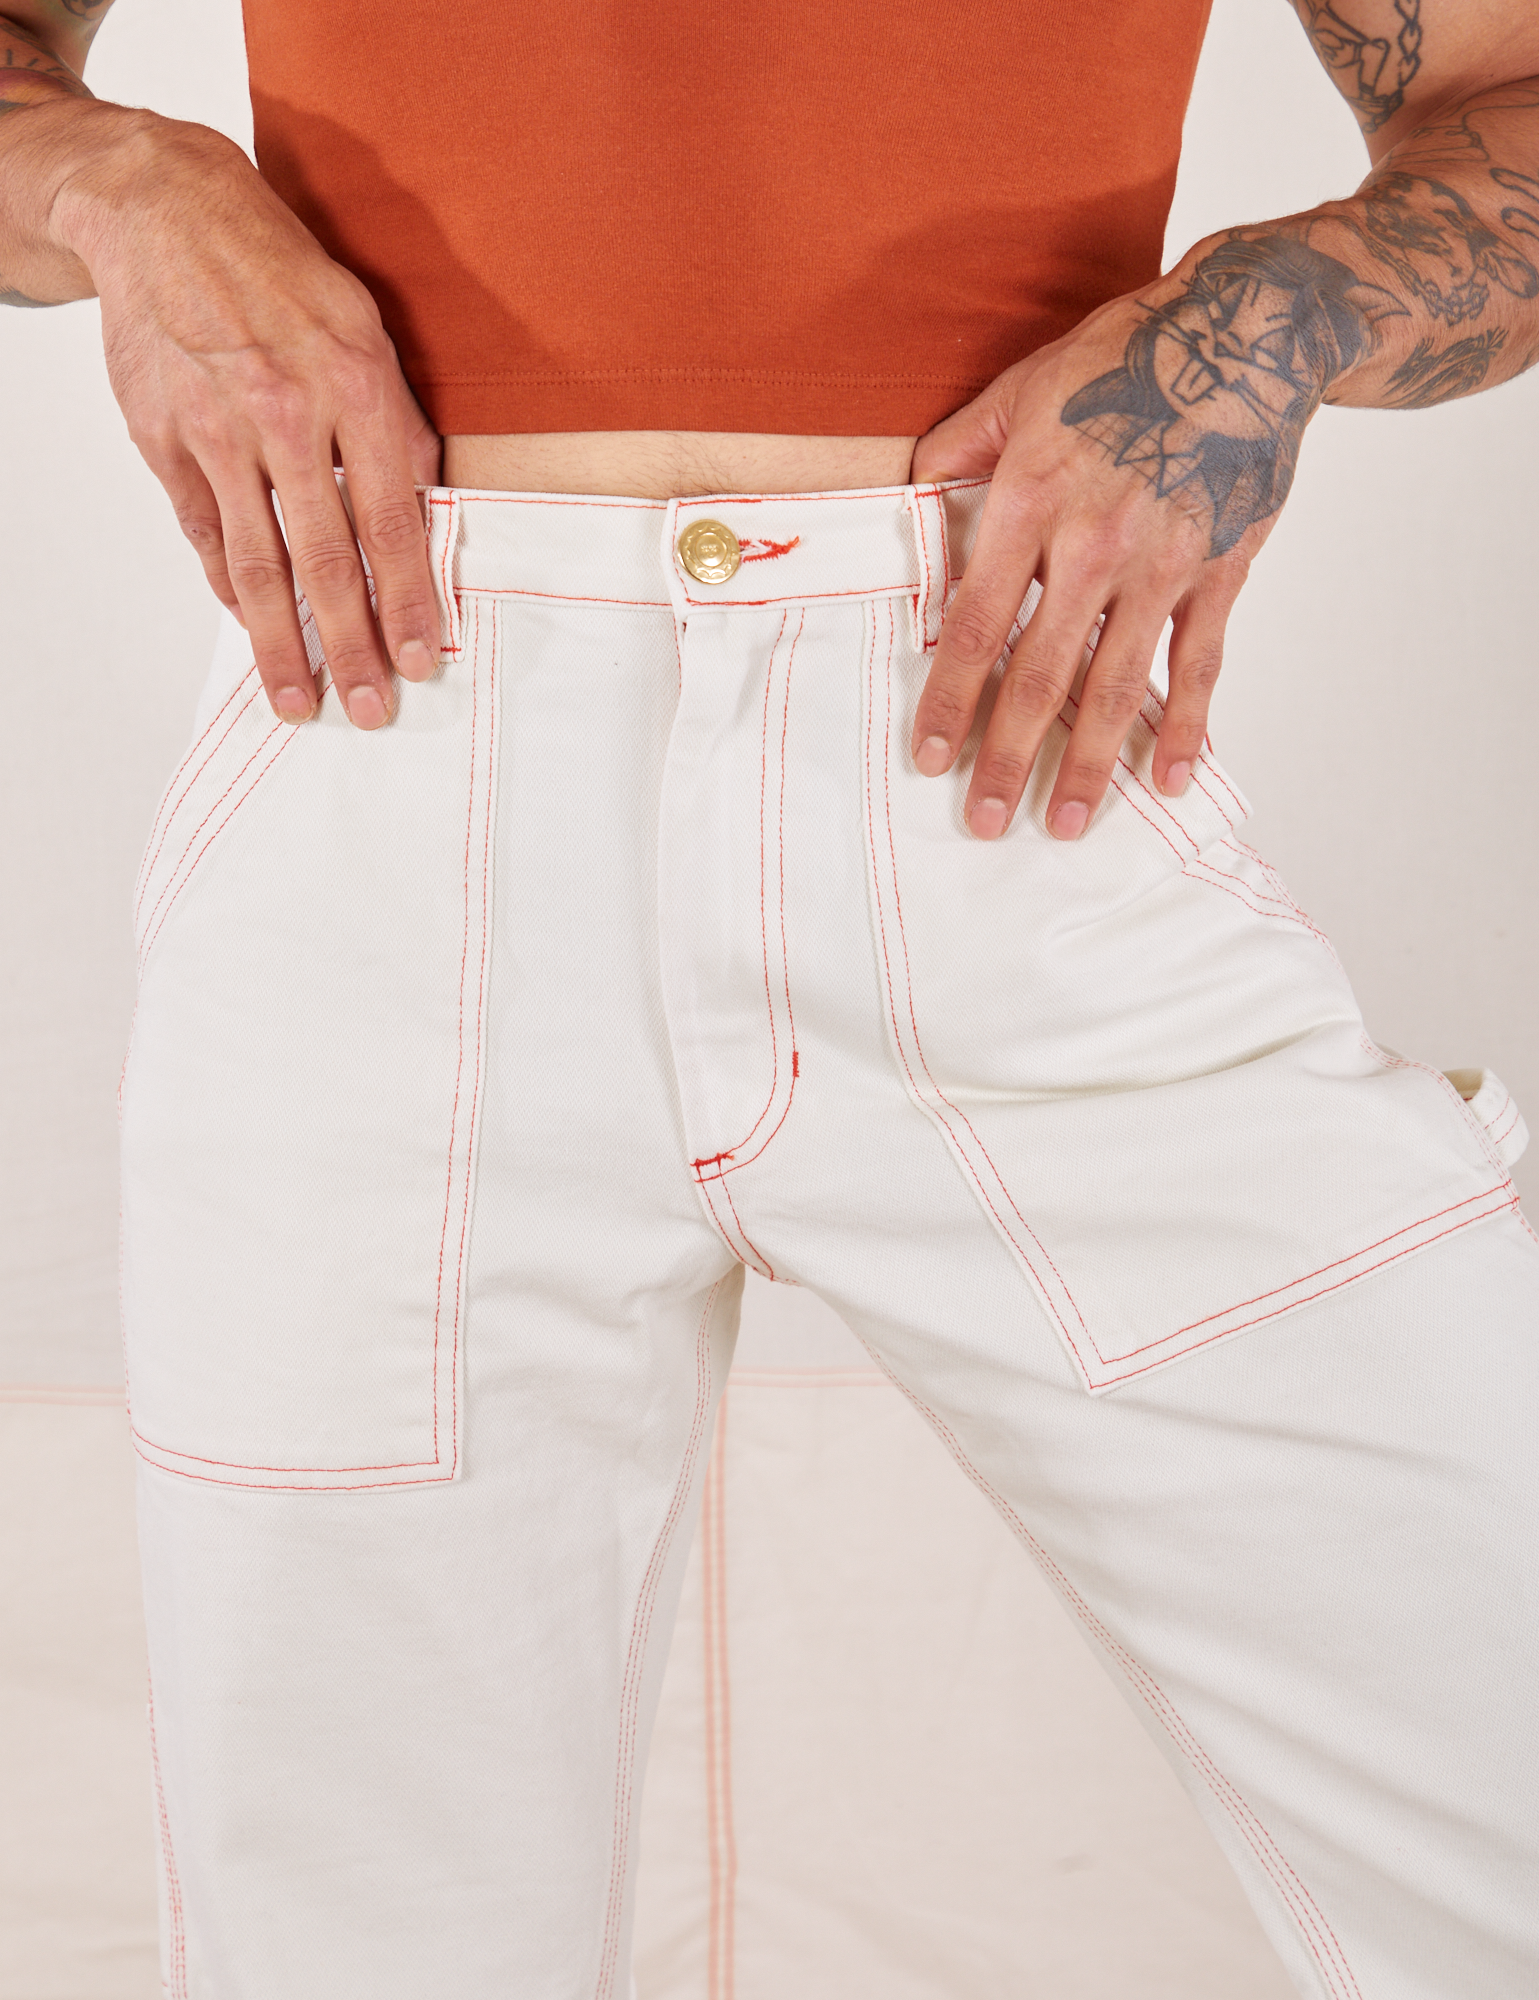 Carpenter Jeans in Vintage Tee Off-White front close up on Jesse